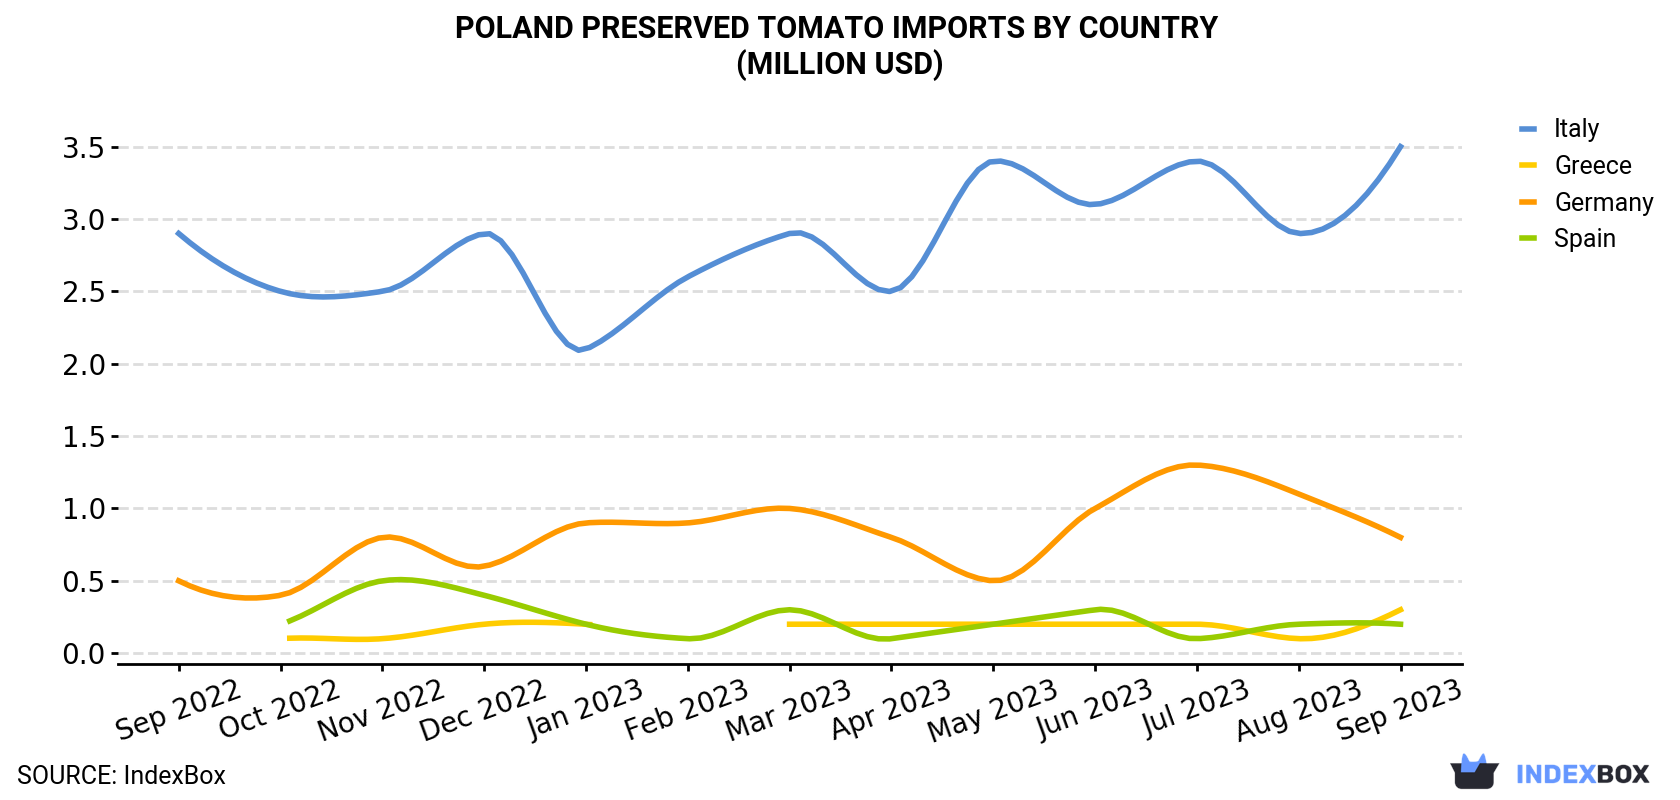 Poland Preserved Tomato Imports By Country (Million USD)